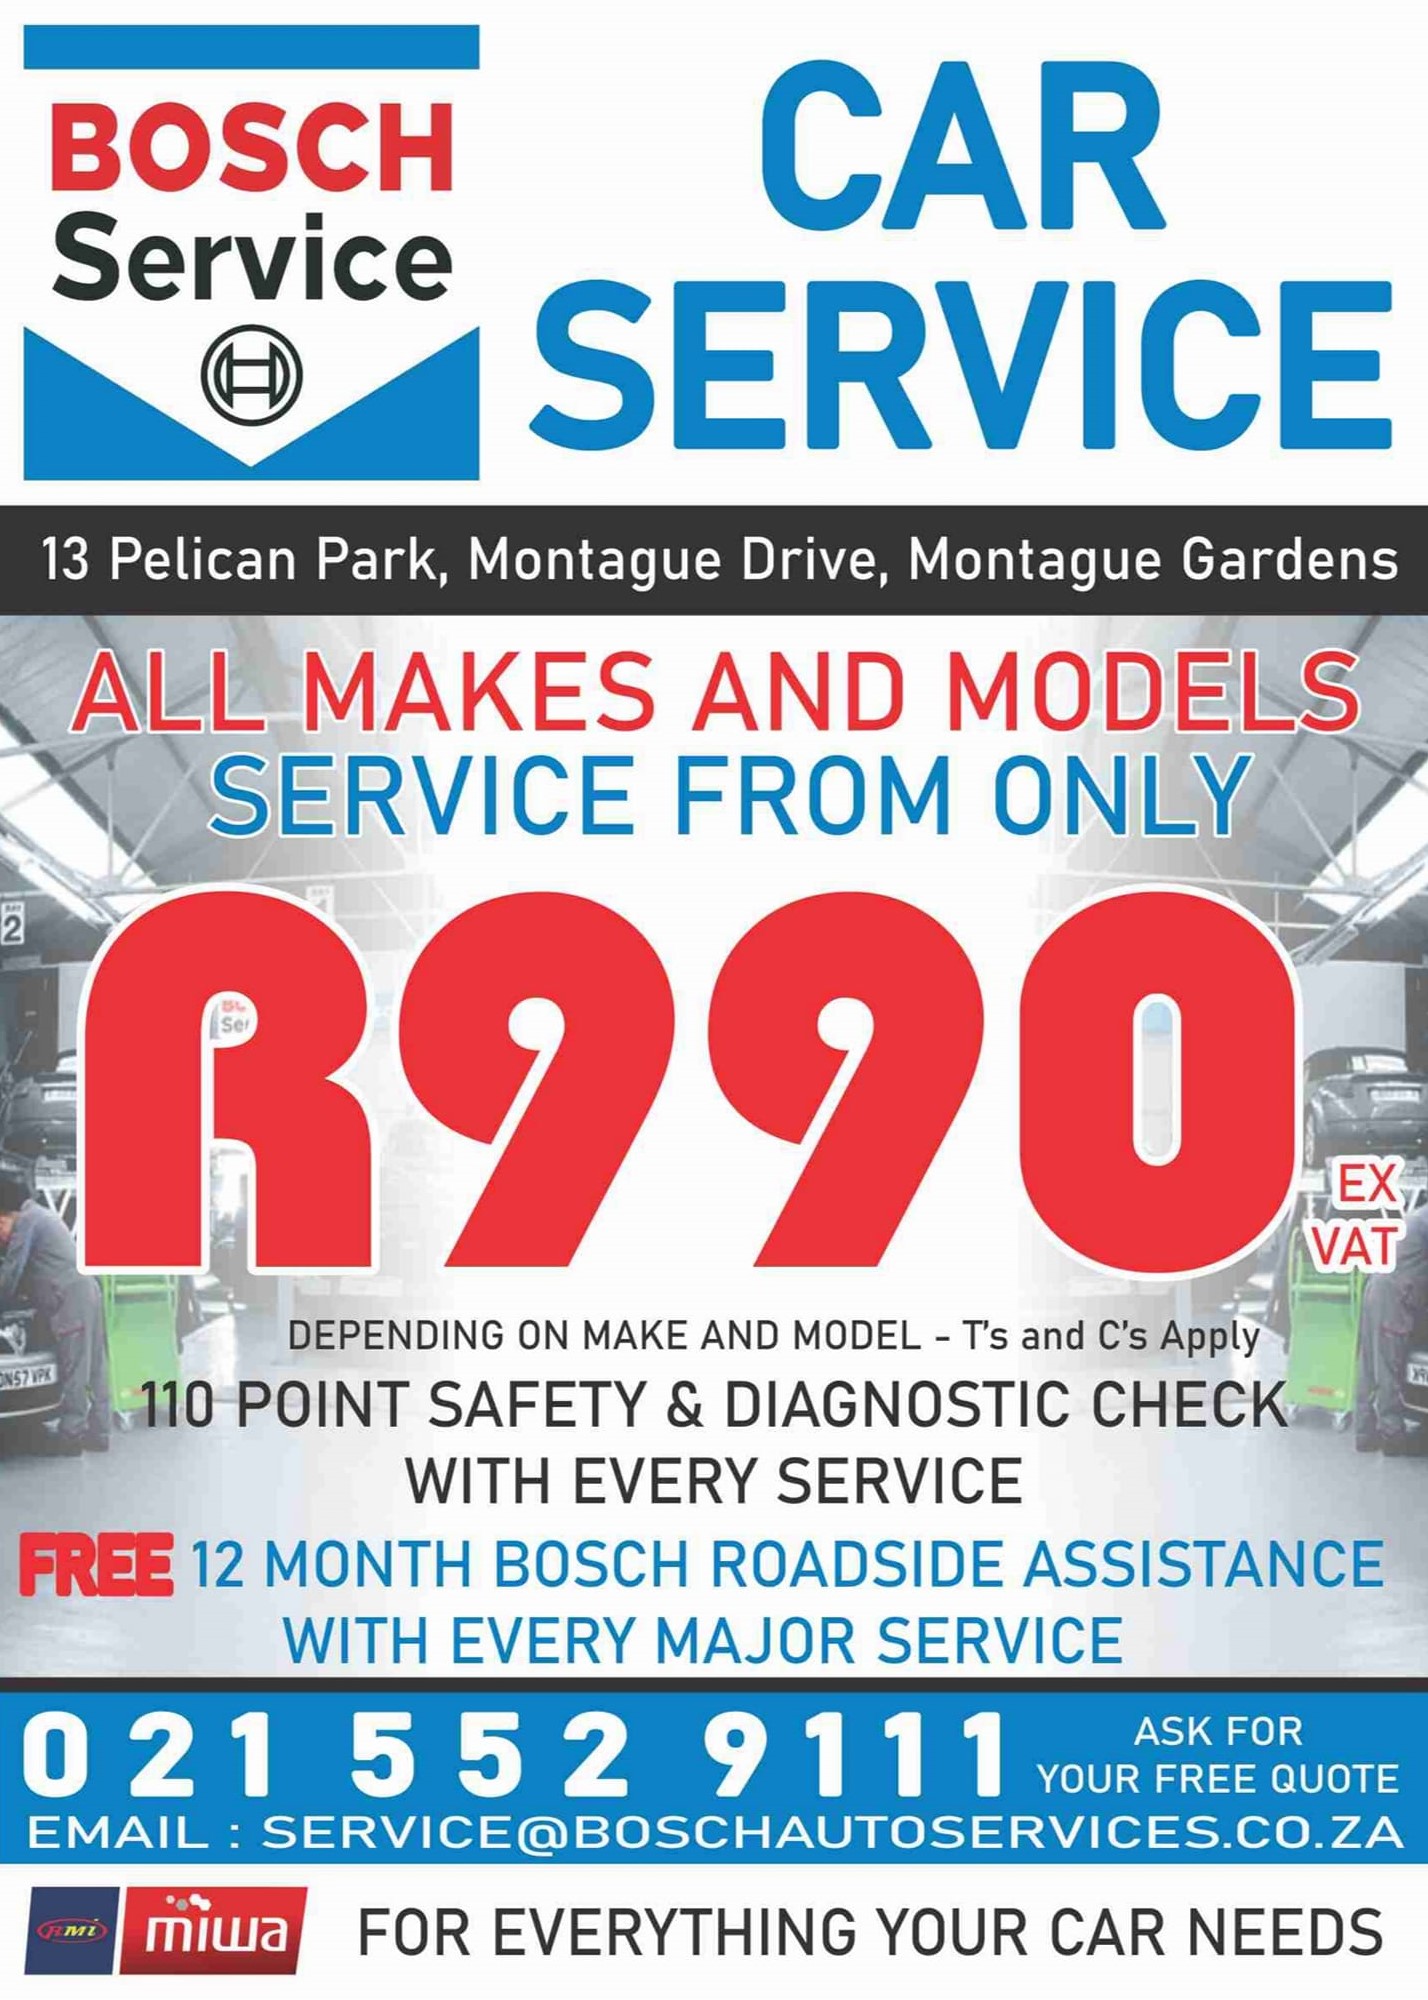 Car service prices in Cape Town